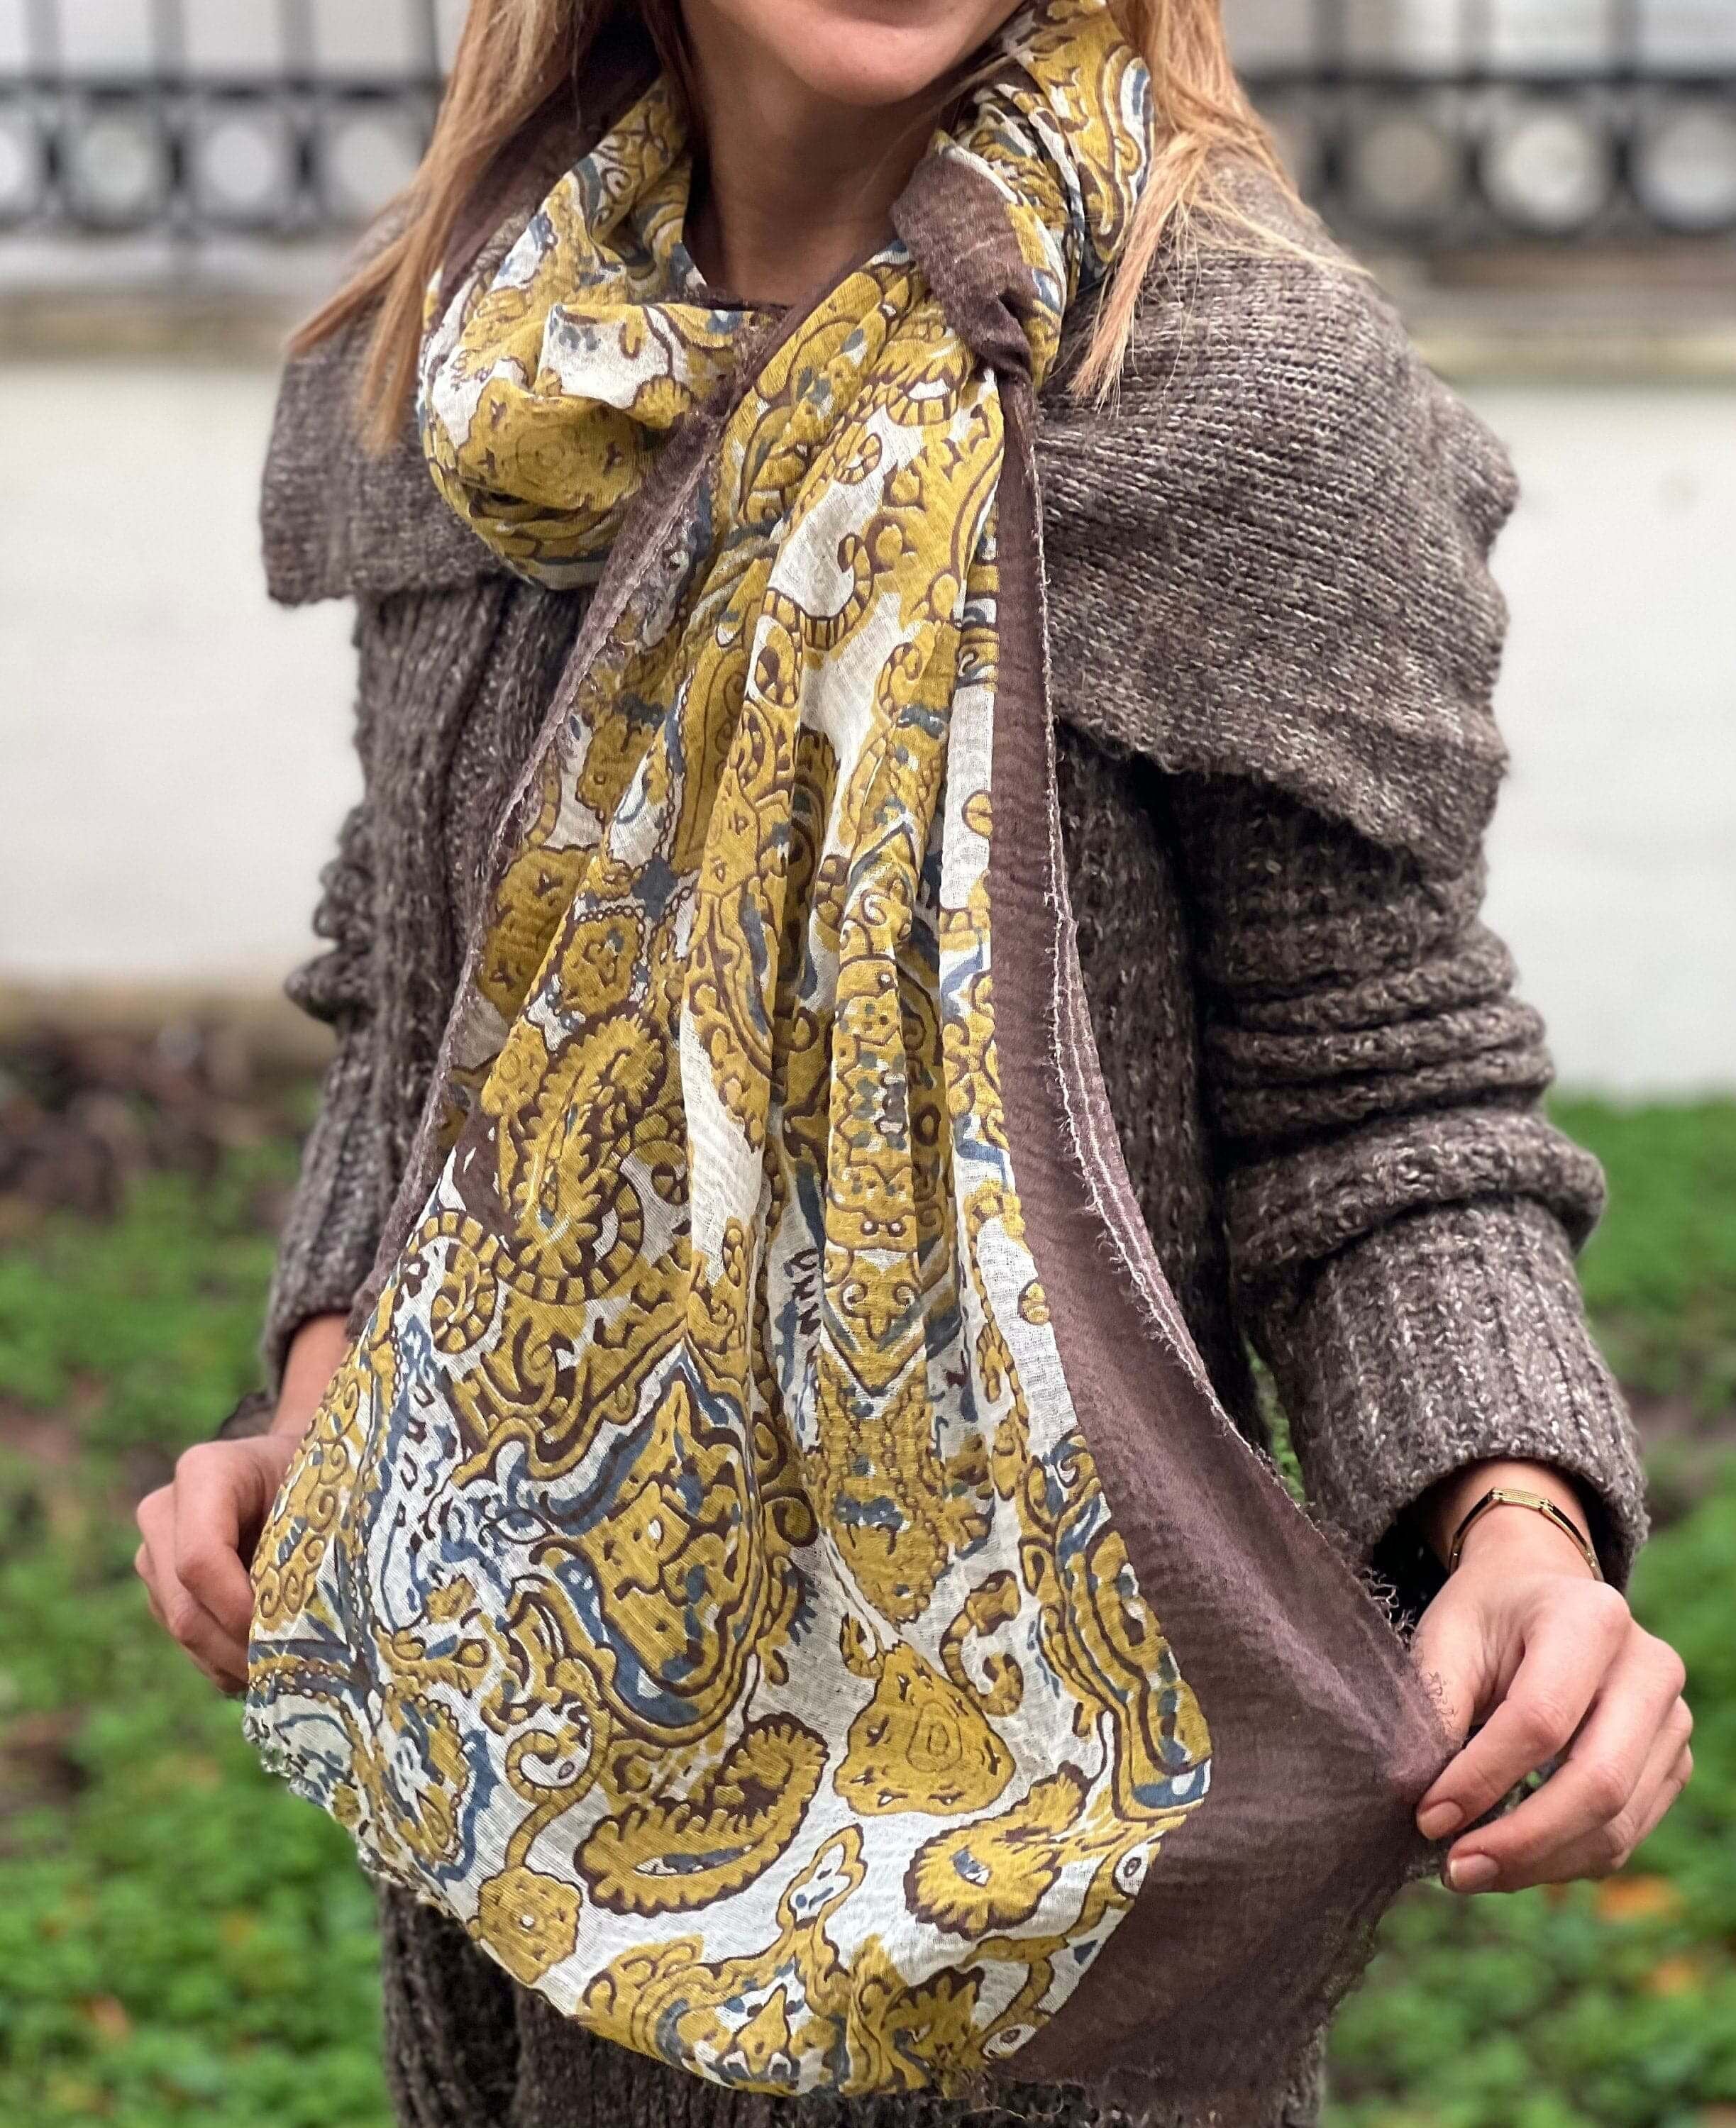 Stay warm and on-trend with this soft and cozy yellow and white ethnic pattern cotton scarf, perfect for any season.